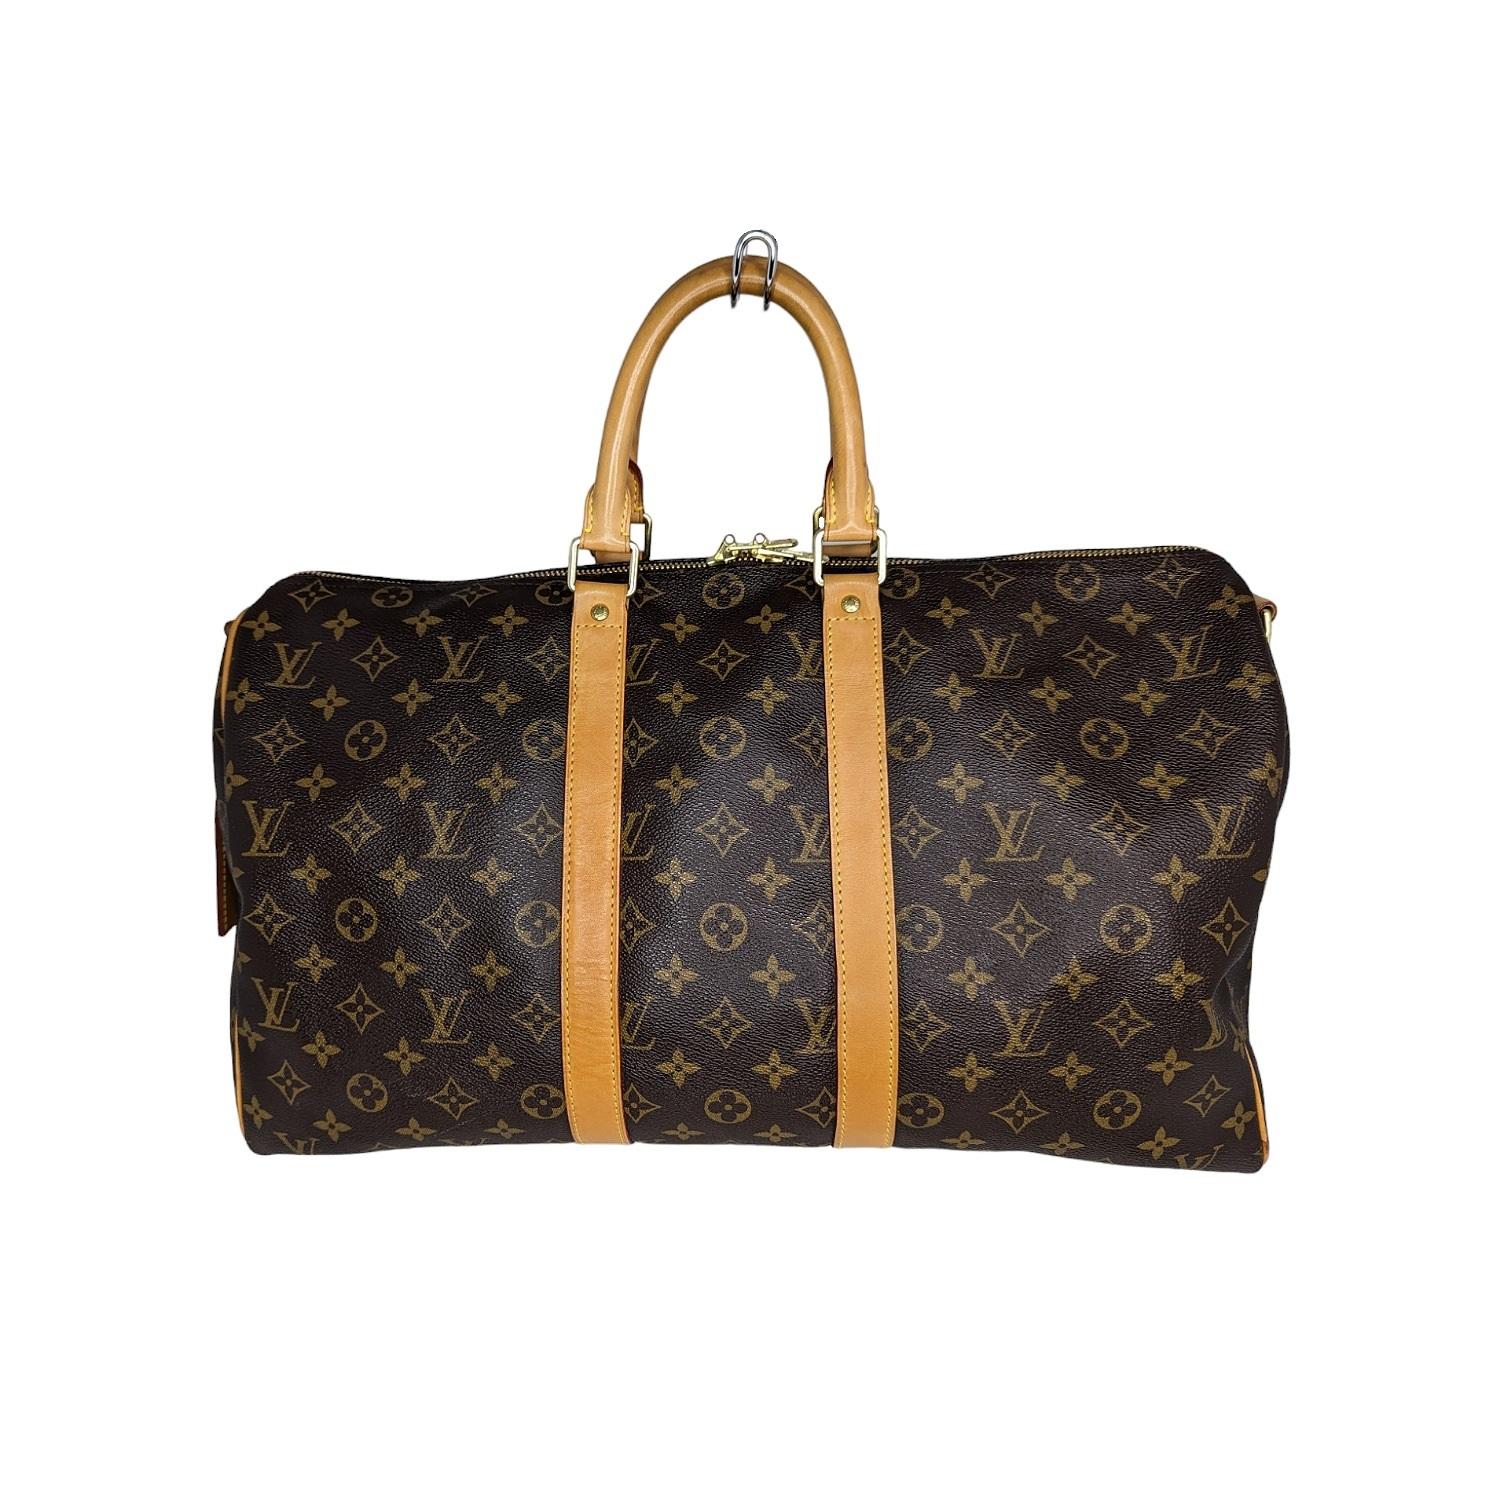 Lightweight and roomy, the Louis Vuitton Keepall Bandoulière 45 is the only way to travel in style. Its timeless shape and classic Monogram canvas are as fresh today as they ever have been. Current Retail $2,440.

Designer: Louis Vuitton
Material: